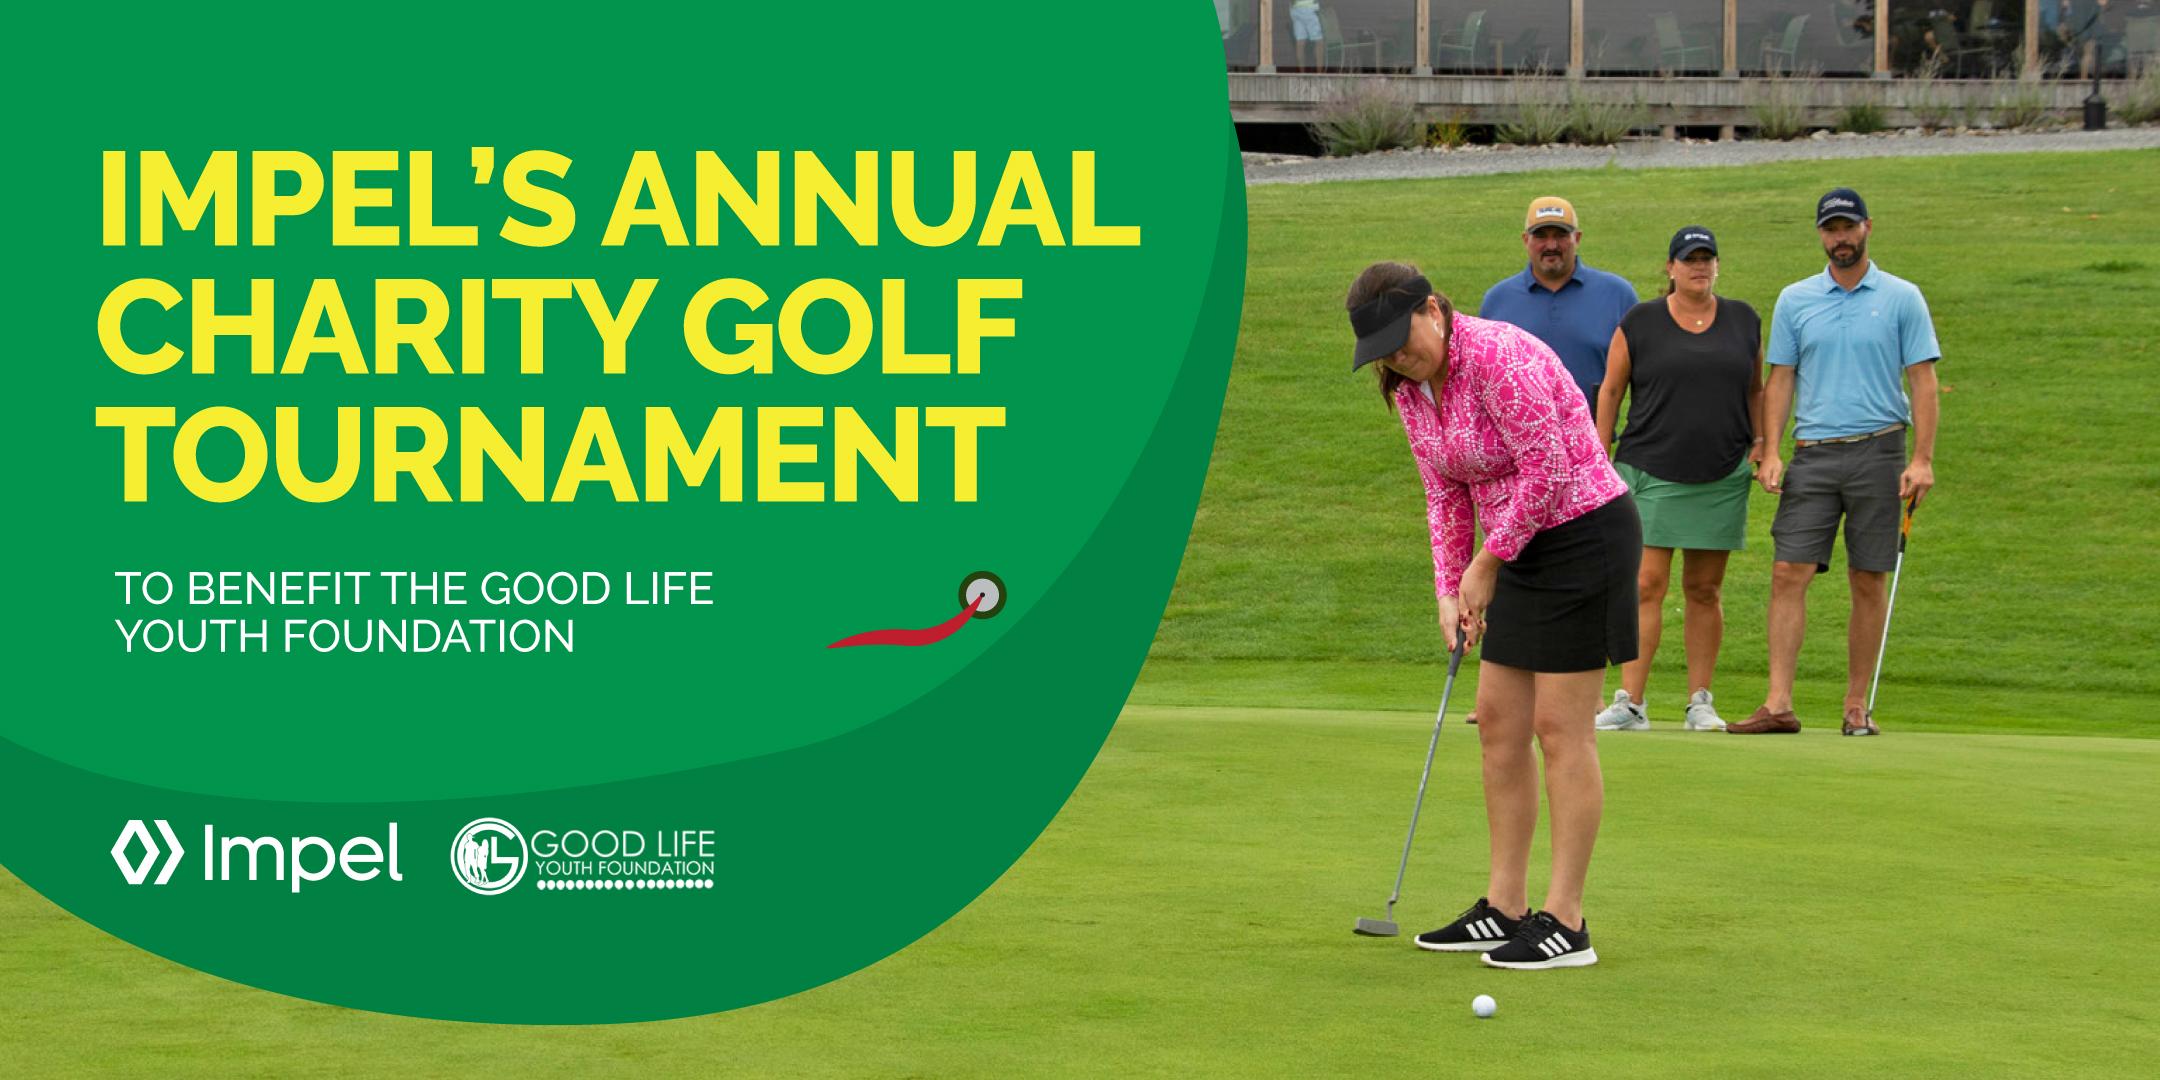 Impel's Annual Charity Golf Tournament for the Good Life Youth Foundation